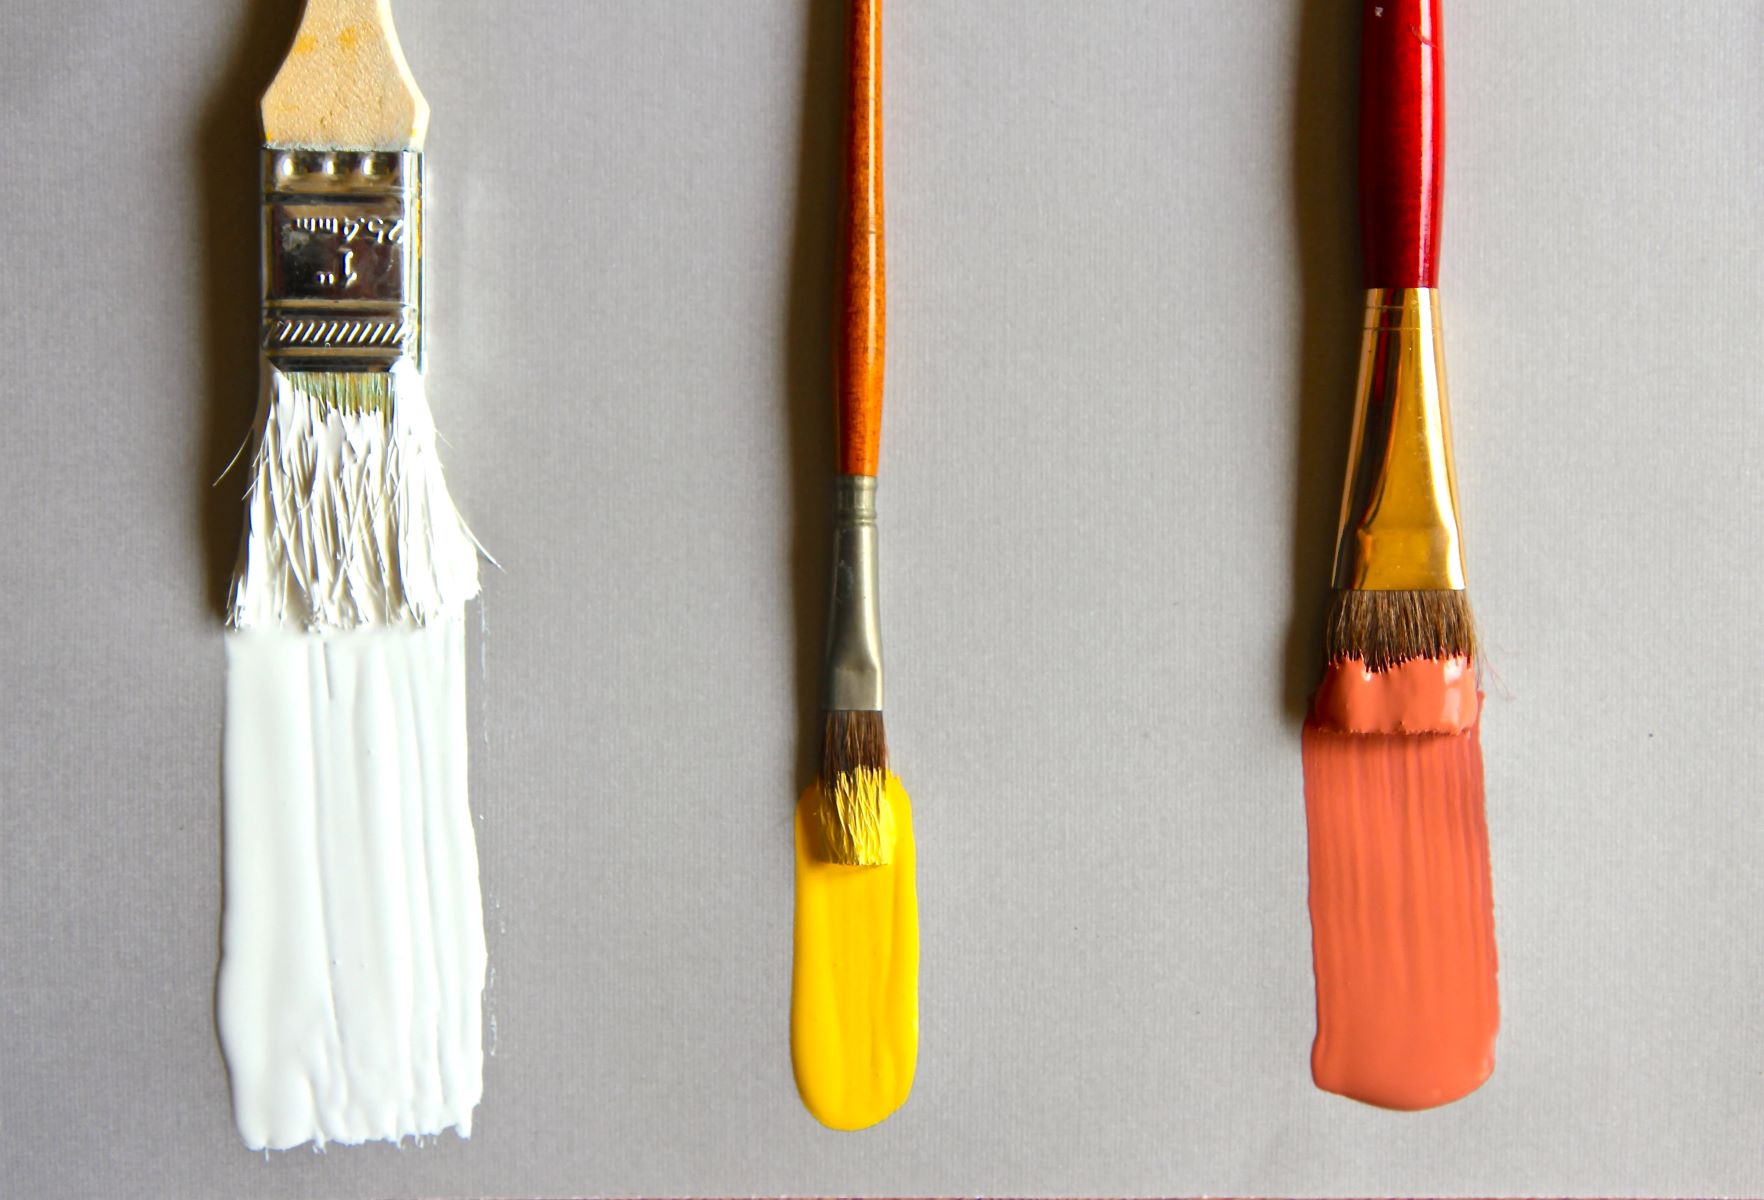 Amazing Ways To Clean Polyurethane Brushes Without Mineral Spirits!